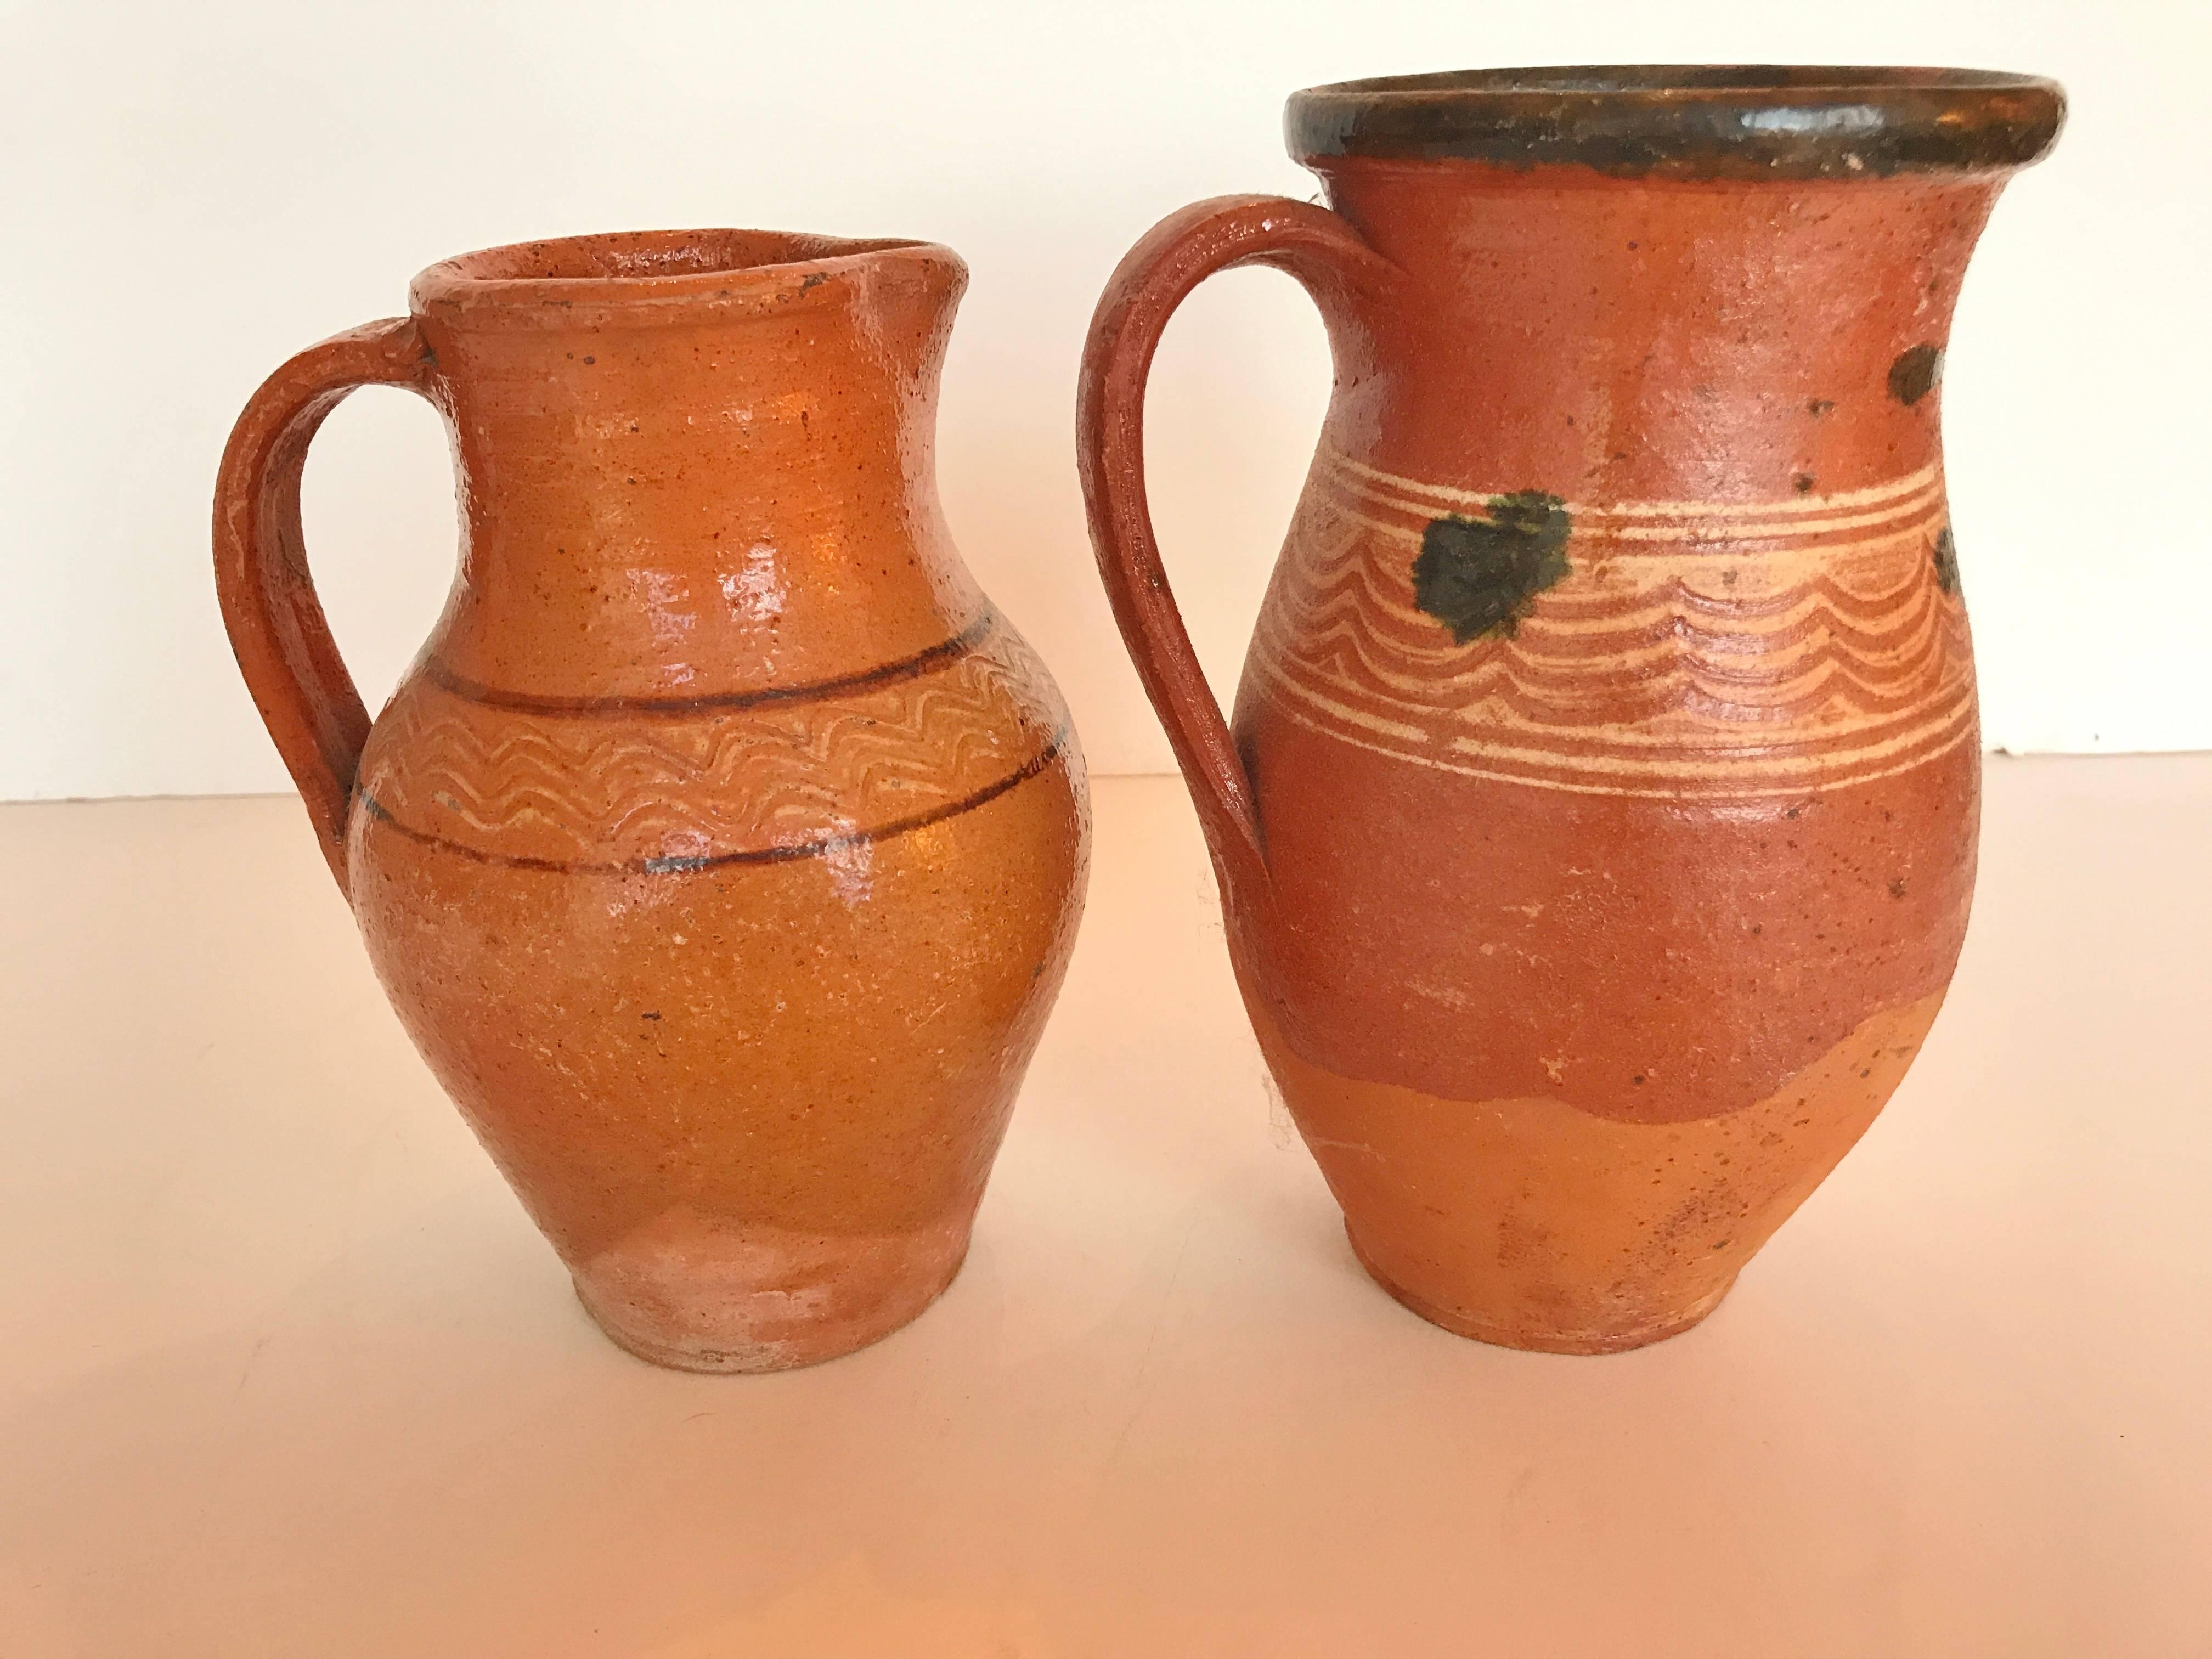 Transylvania vintage pottery pitchers. Hand-painted redware Folk Art from Romania. Decorative use. Measures: One pitcher is 8.25 inches high. Second pitcher is 7.5 inches high.